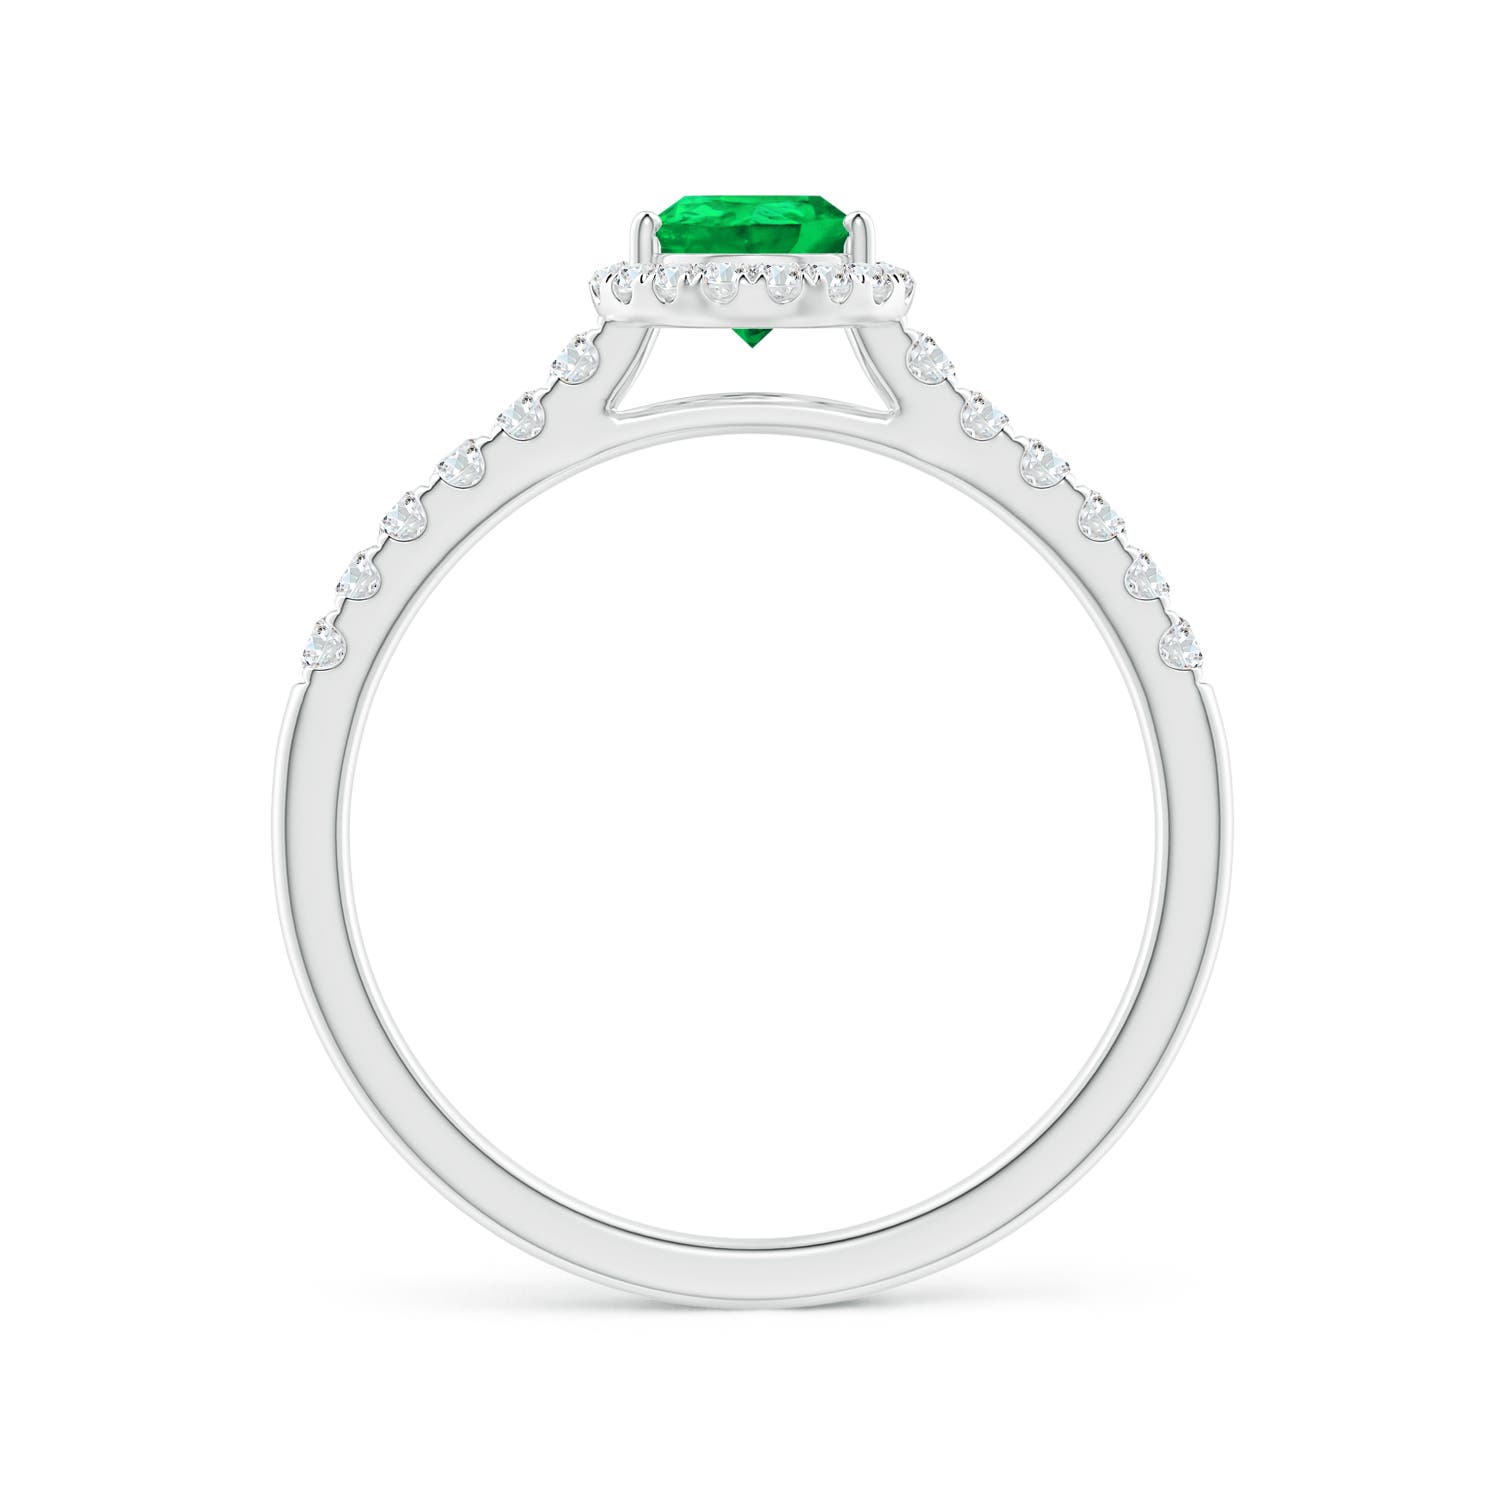 AAA - Emerald / 0.88 CT / 14 KT White Gold